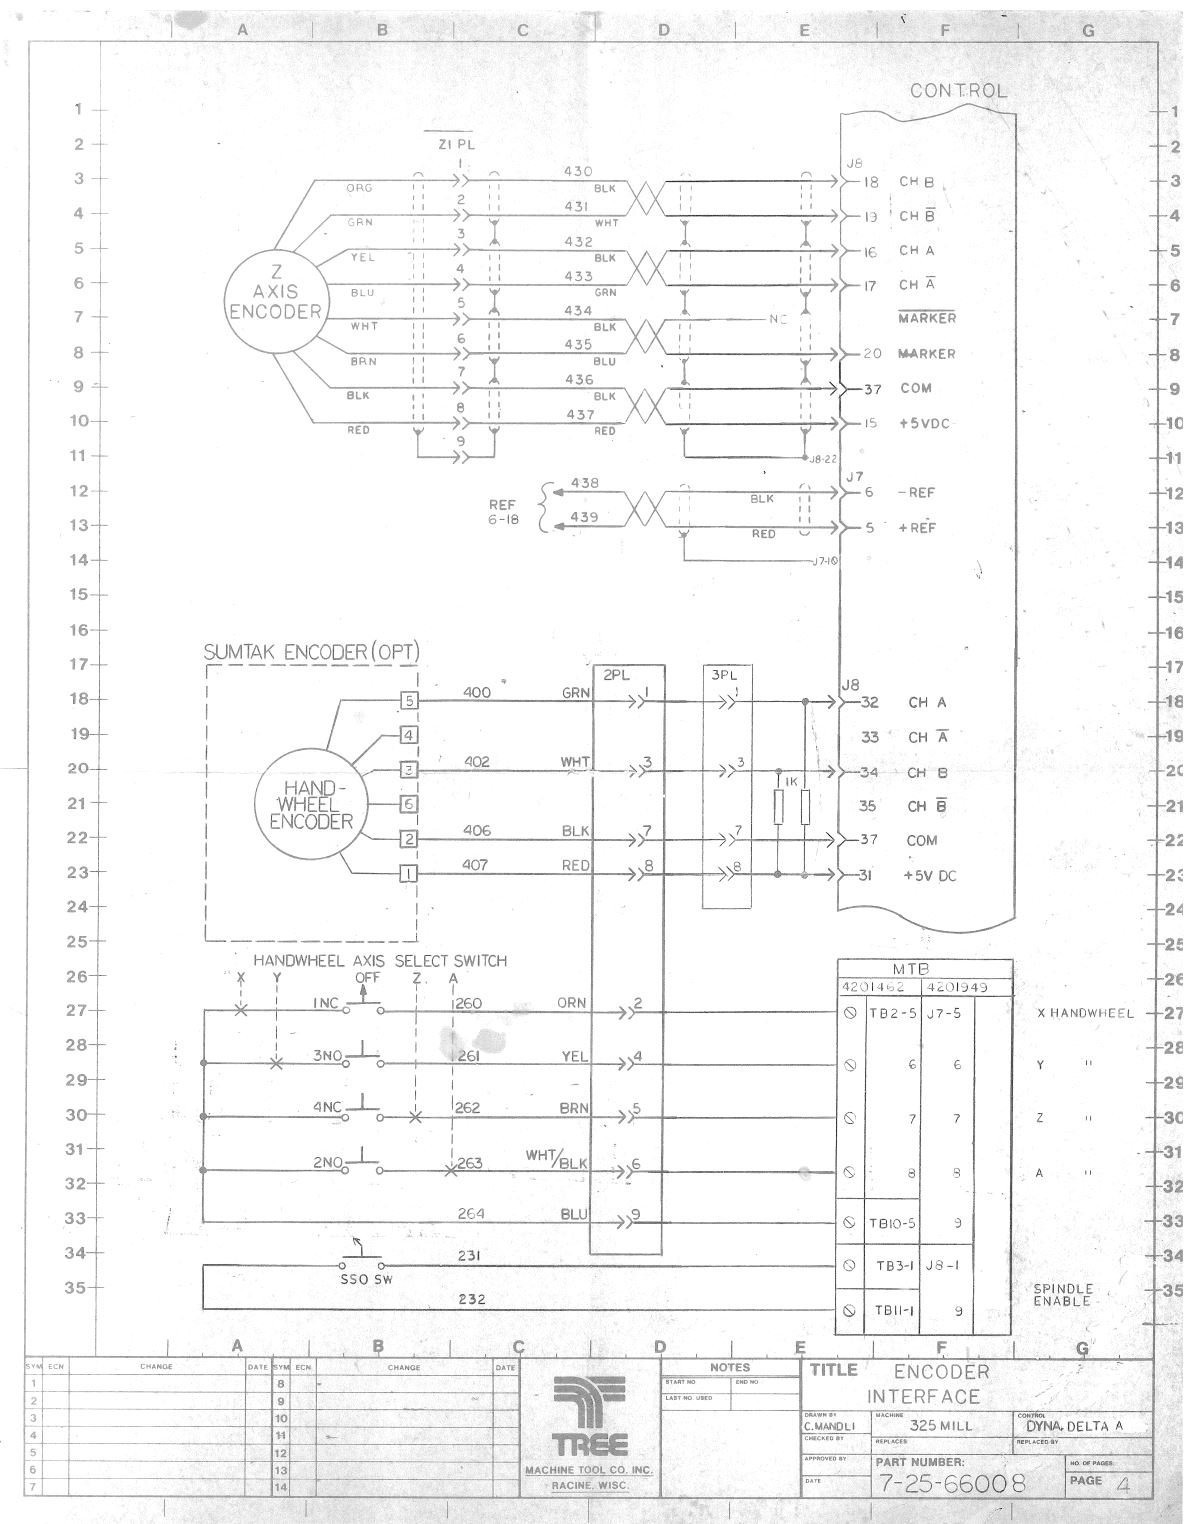 Tree 325 Schematic Page 4.